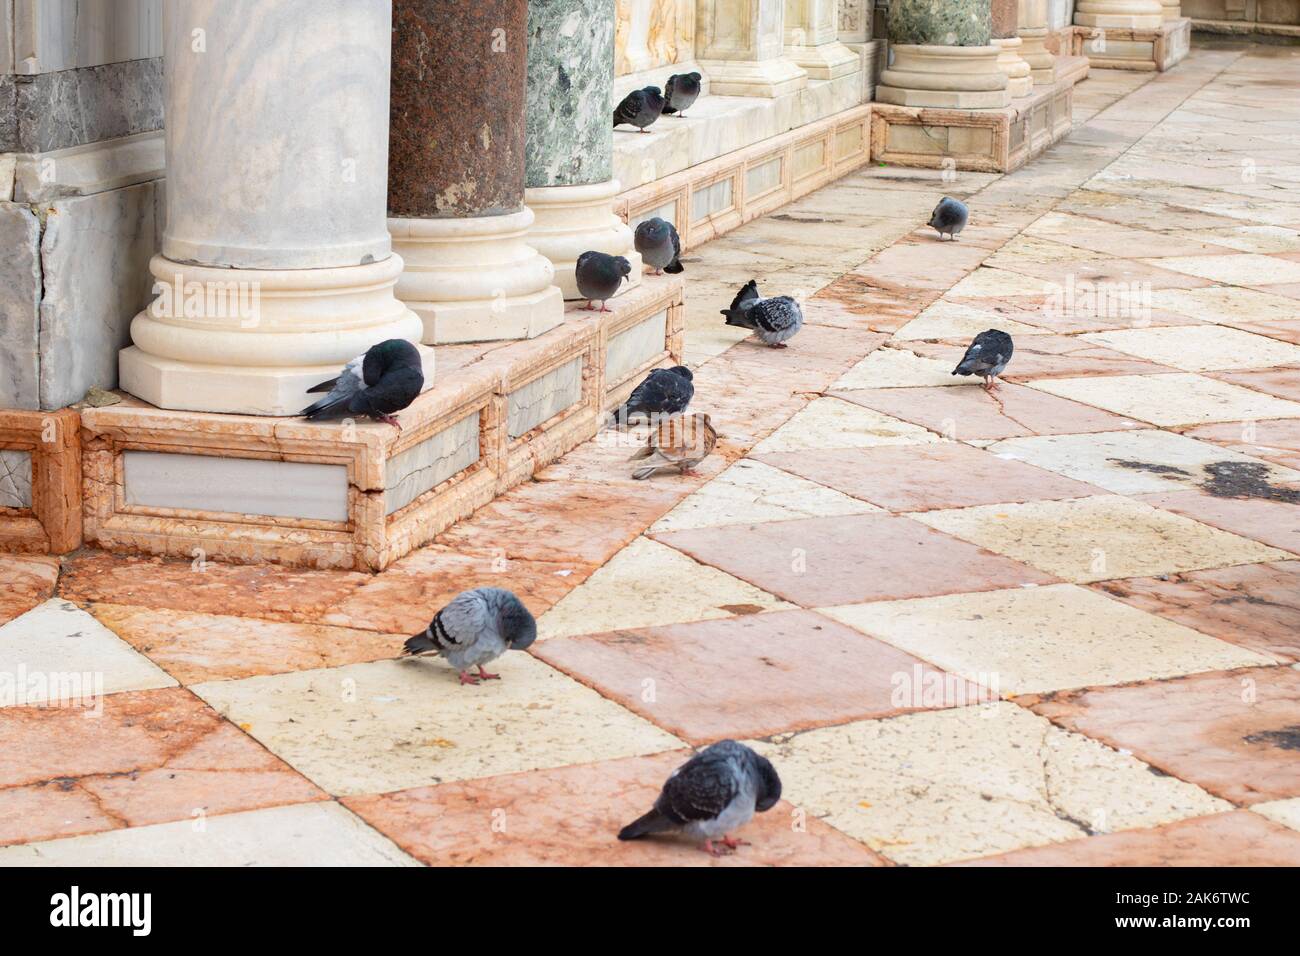 Flight of pigeons, pidgeons, marble pavement, tiles, tilded, birds, gathered, nature, fountain, columns, venice, italy, wildlife, pests, concept Stock Photo